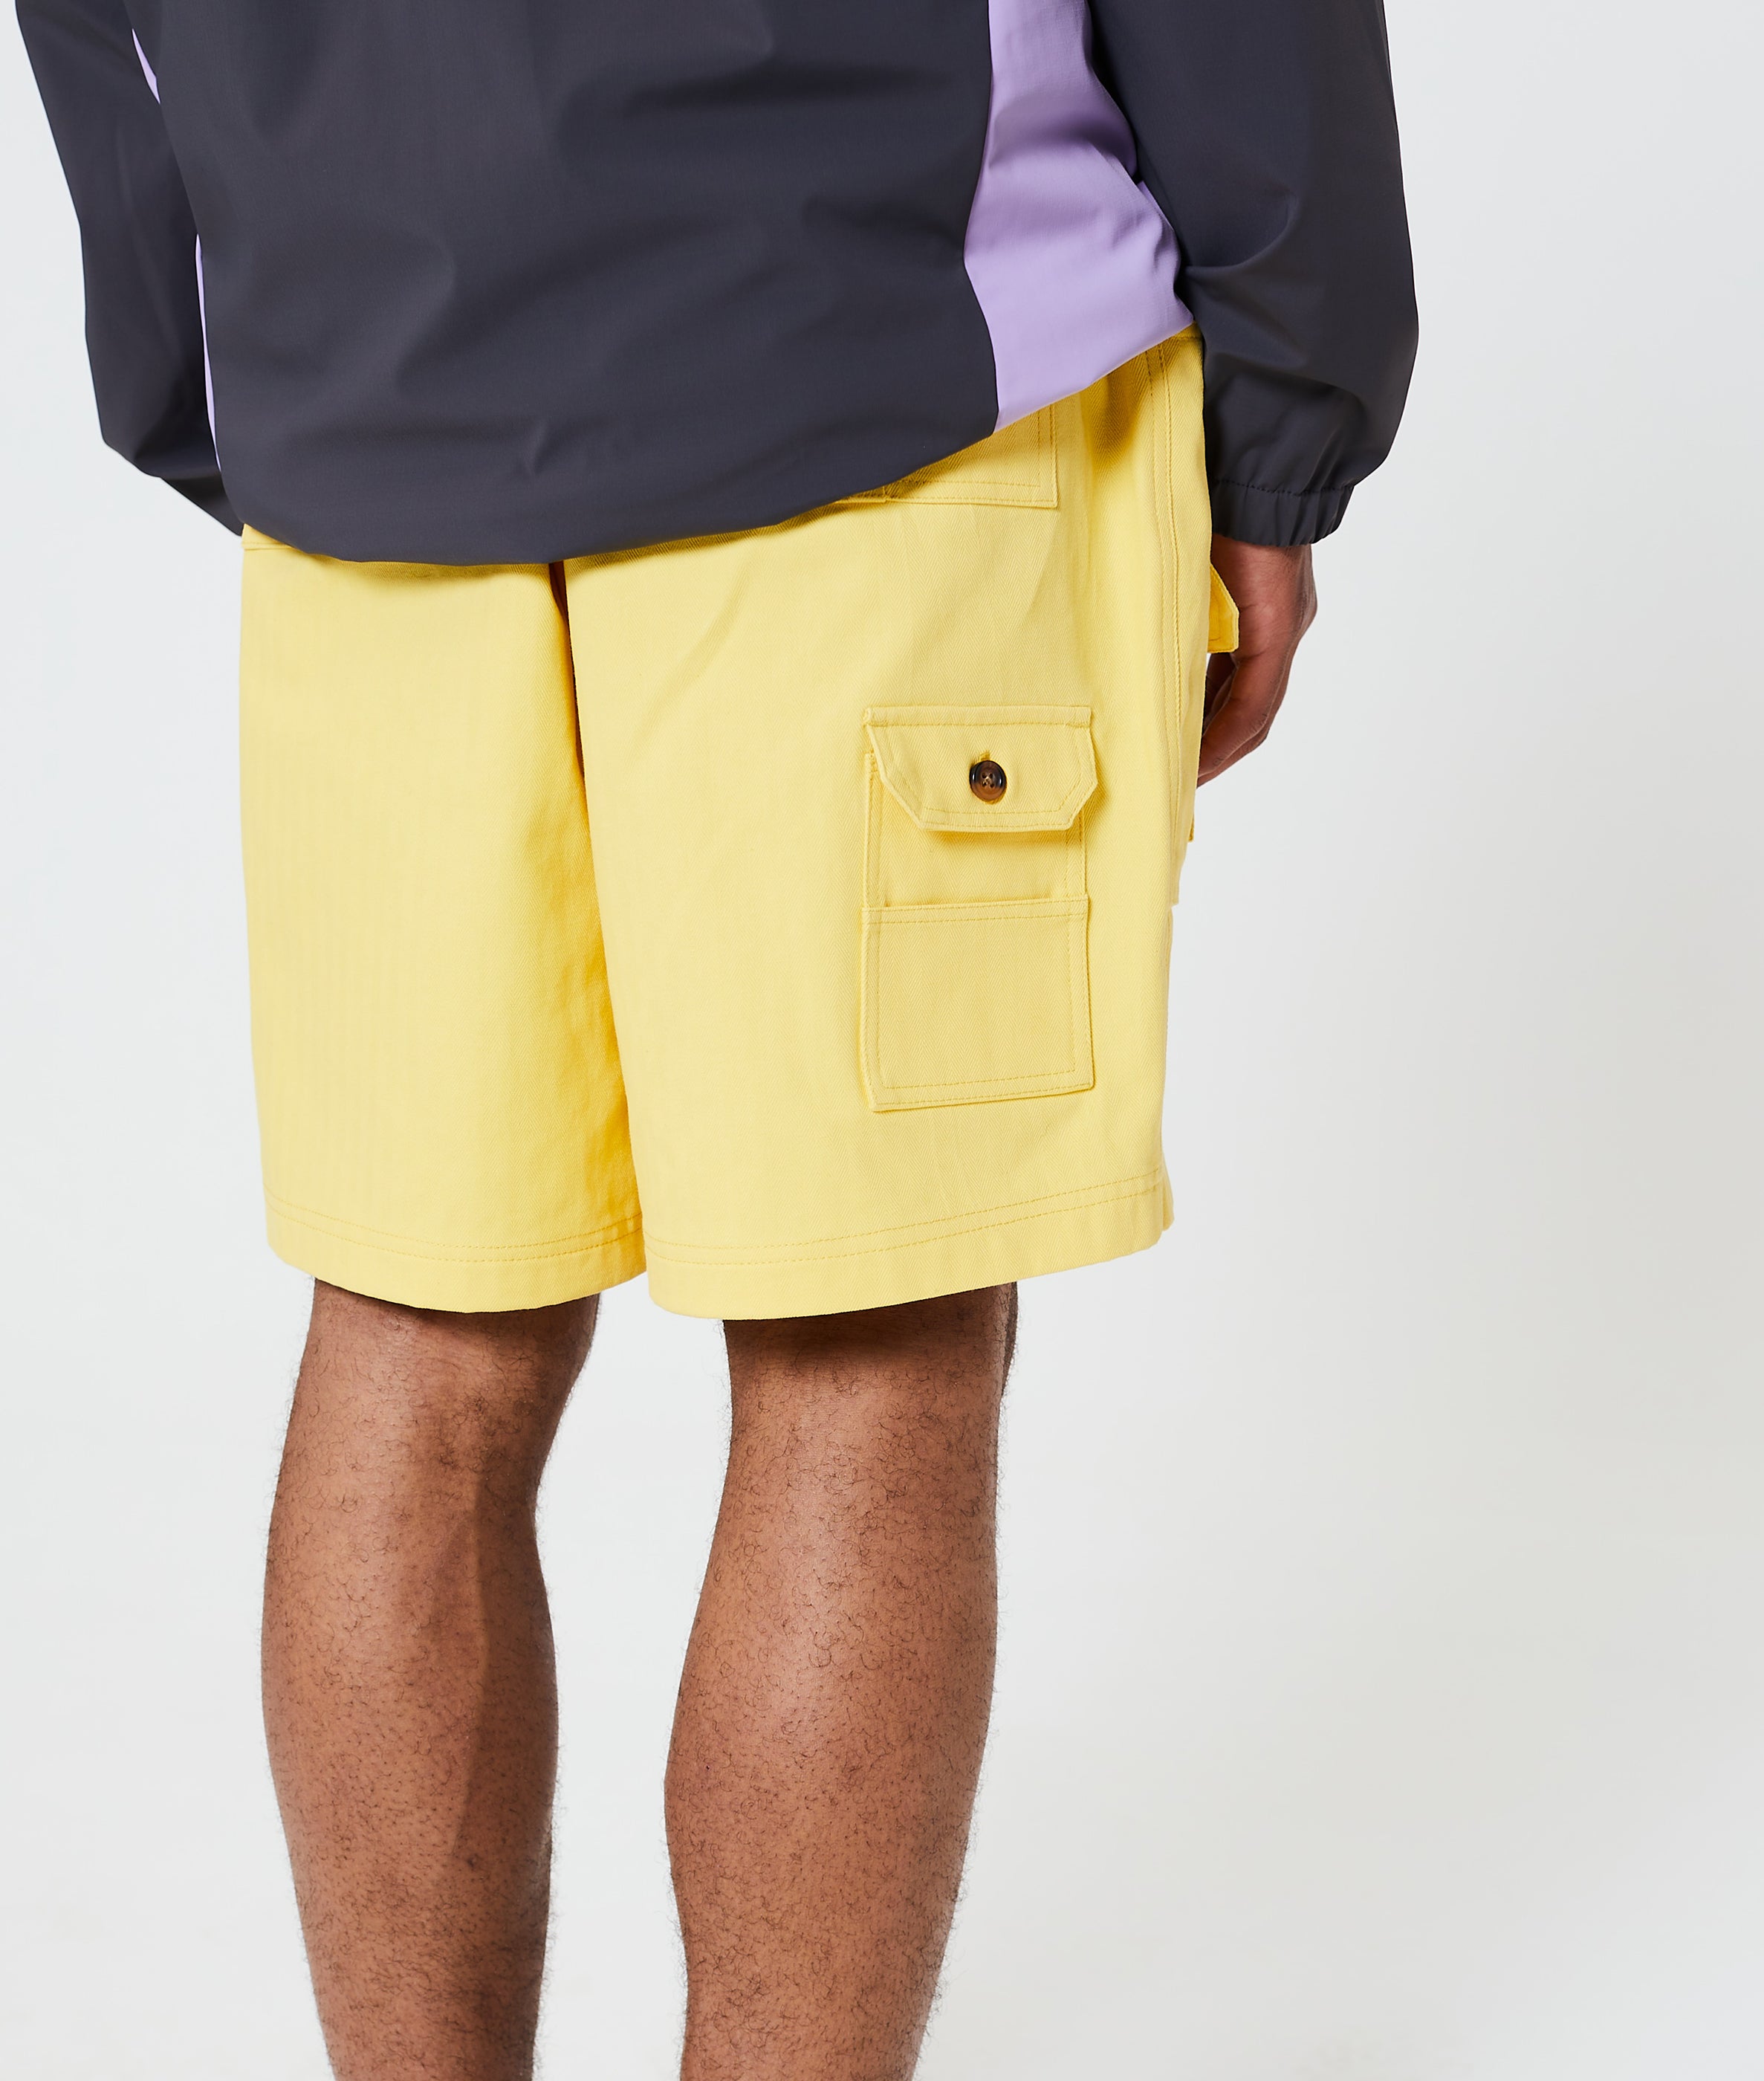 New drop this Friday at 6am PST, pocket pop shorts in beige